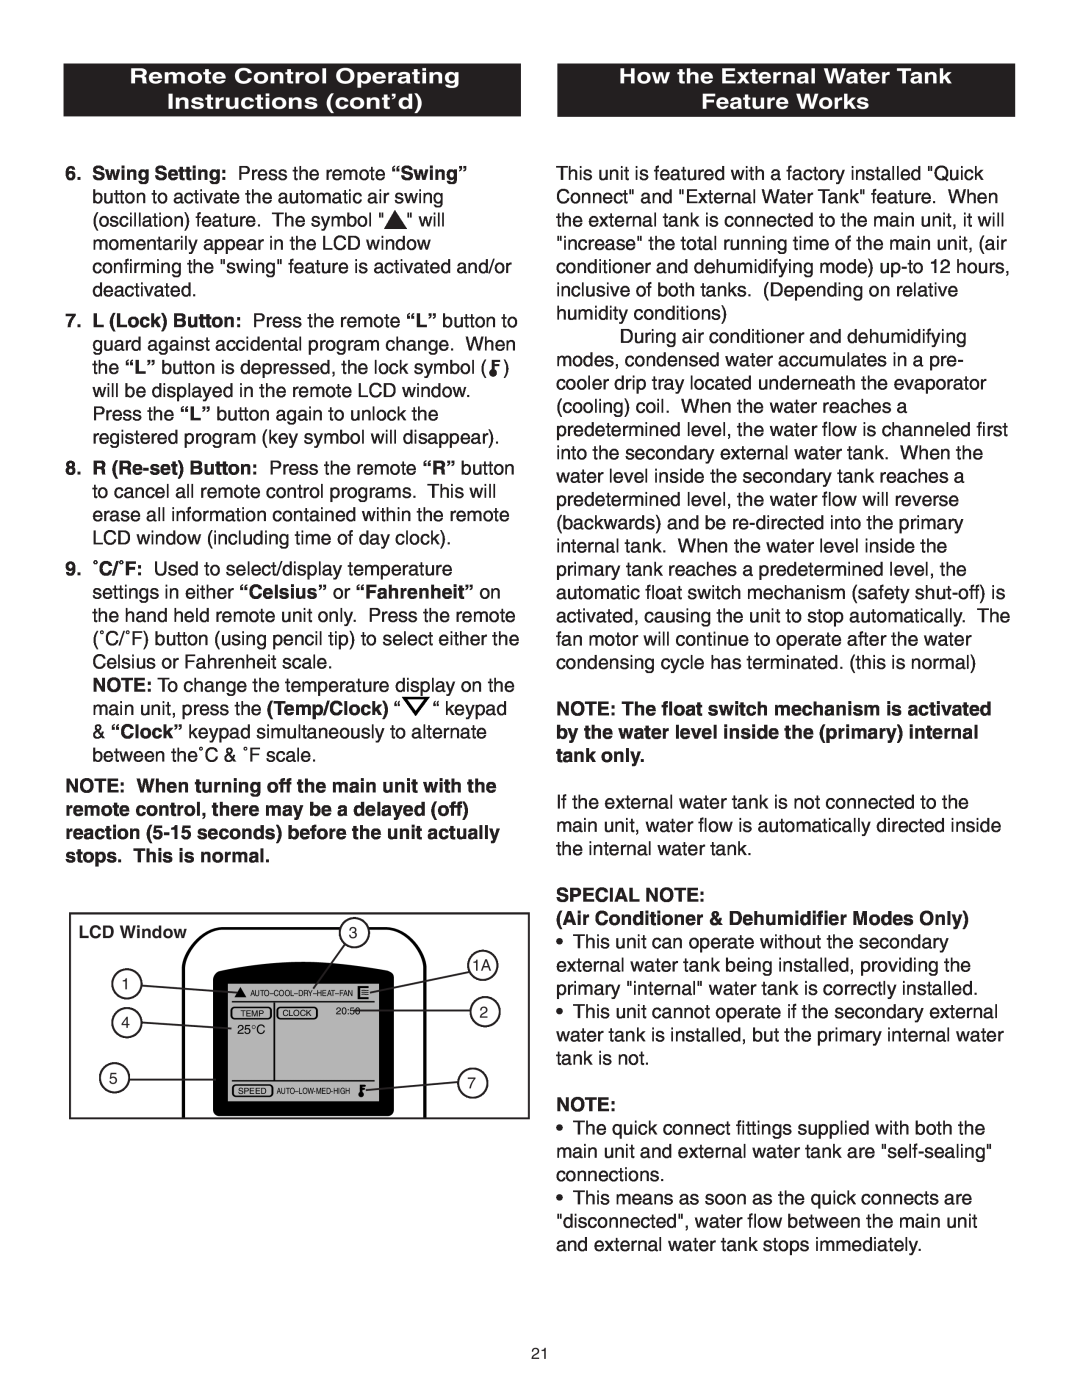 Danby SPAC8499 Remote Control Operating, How the External Water Tank, Instructions cont’d, Feature Works, Special Note 